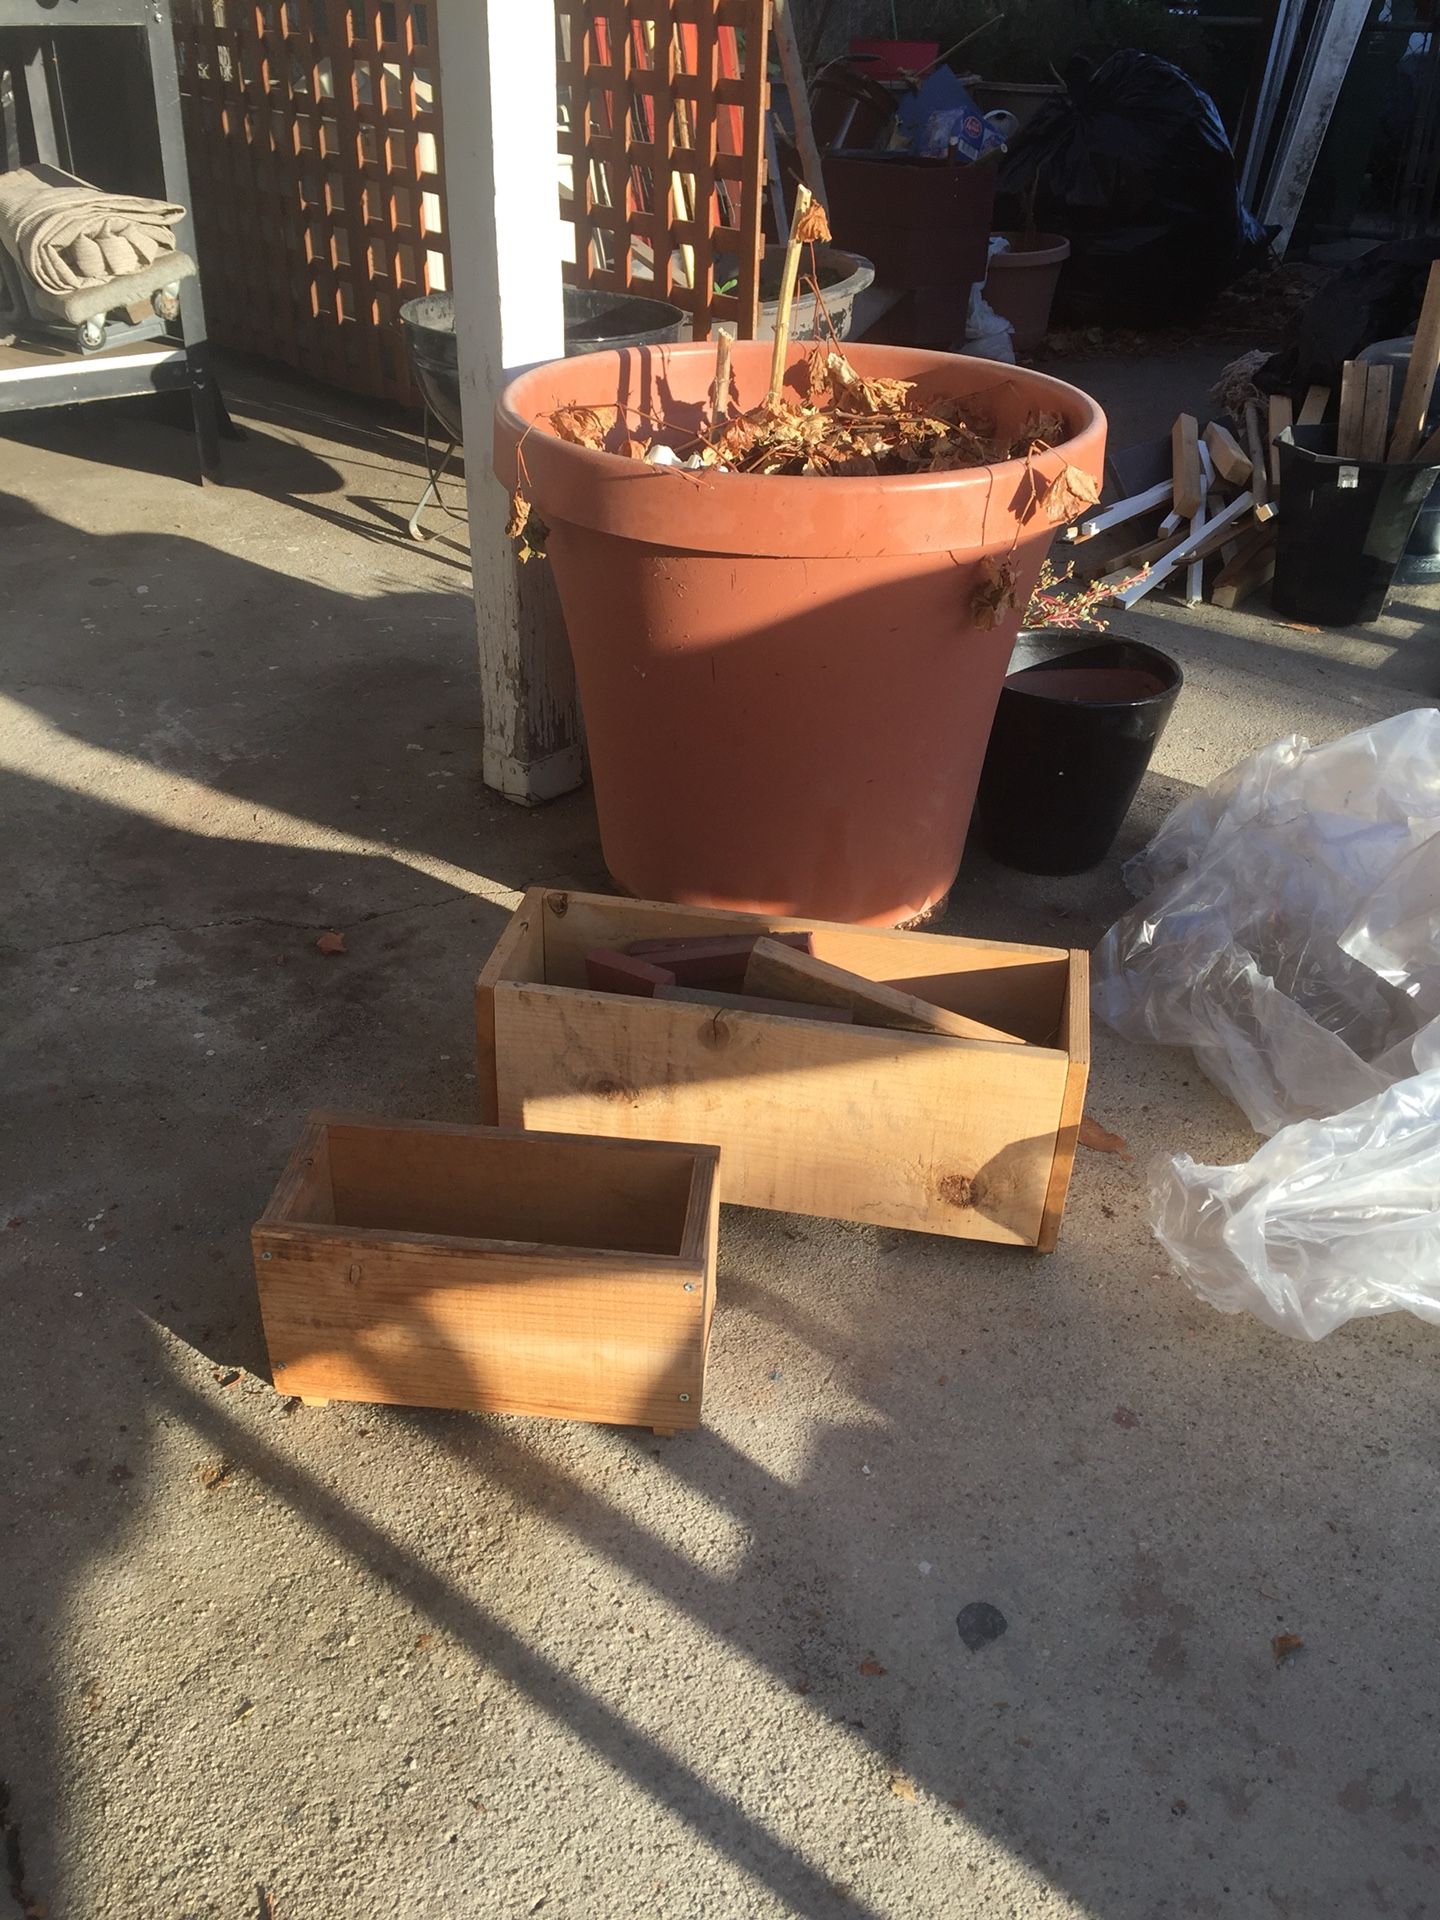 Two cedar boxes for herbs or vegetables